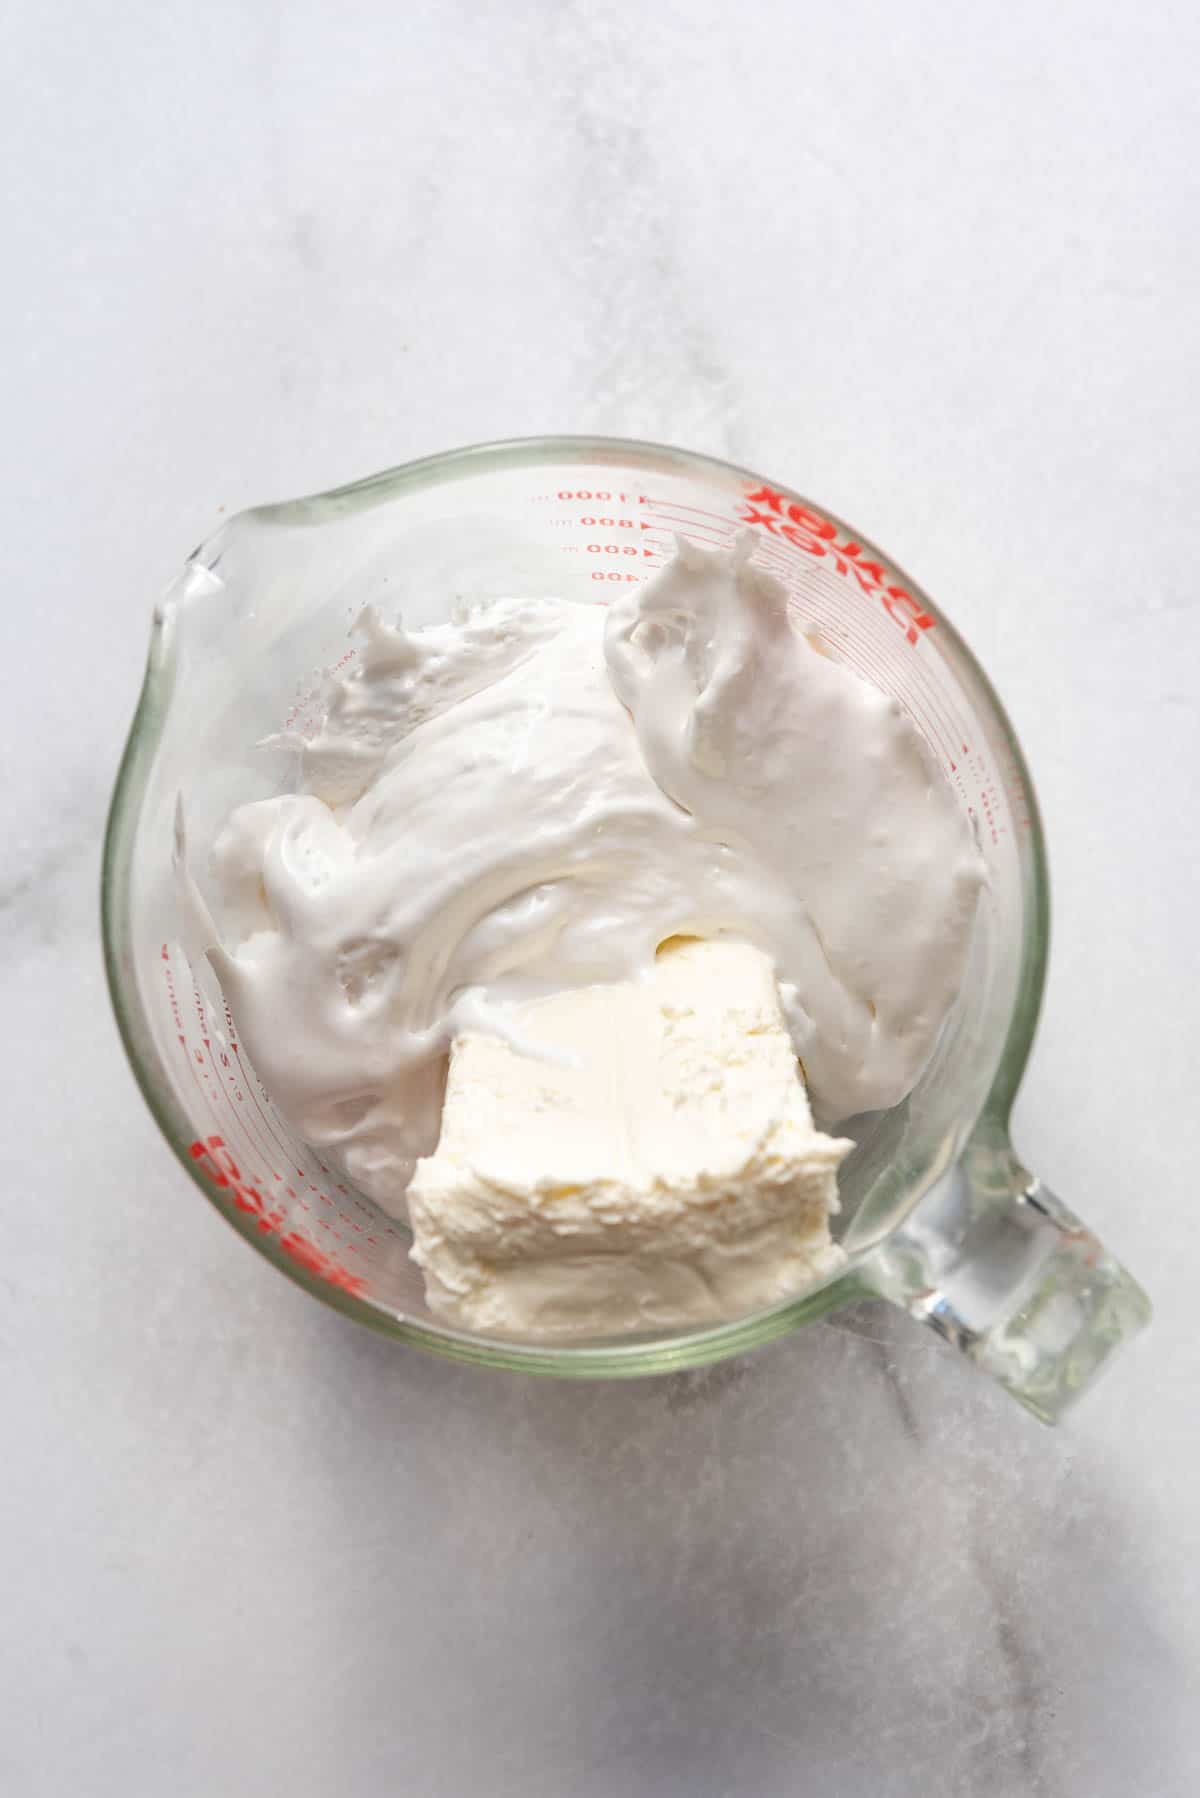 Marshmallow fluff and cream cheese in a glass mixing bowl.